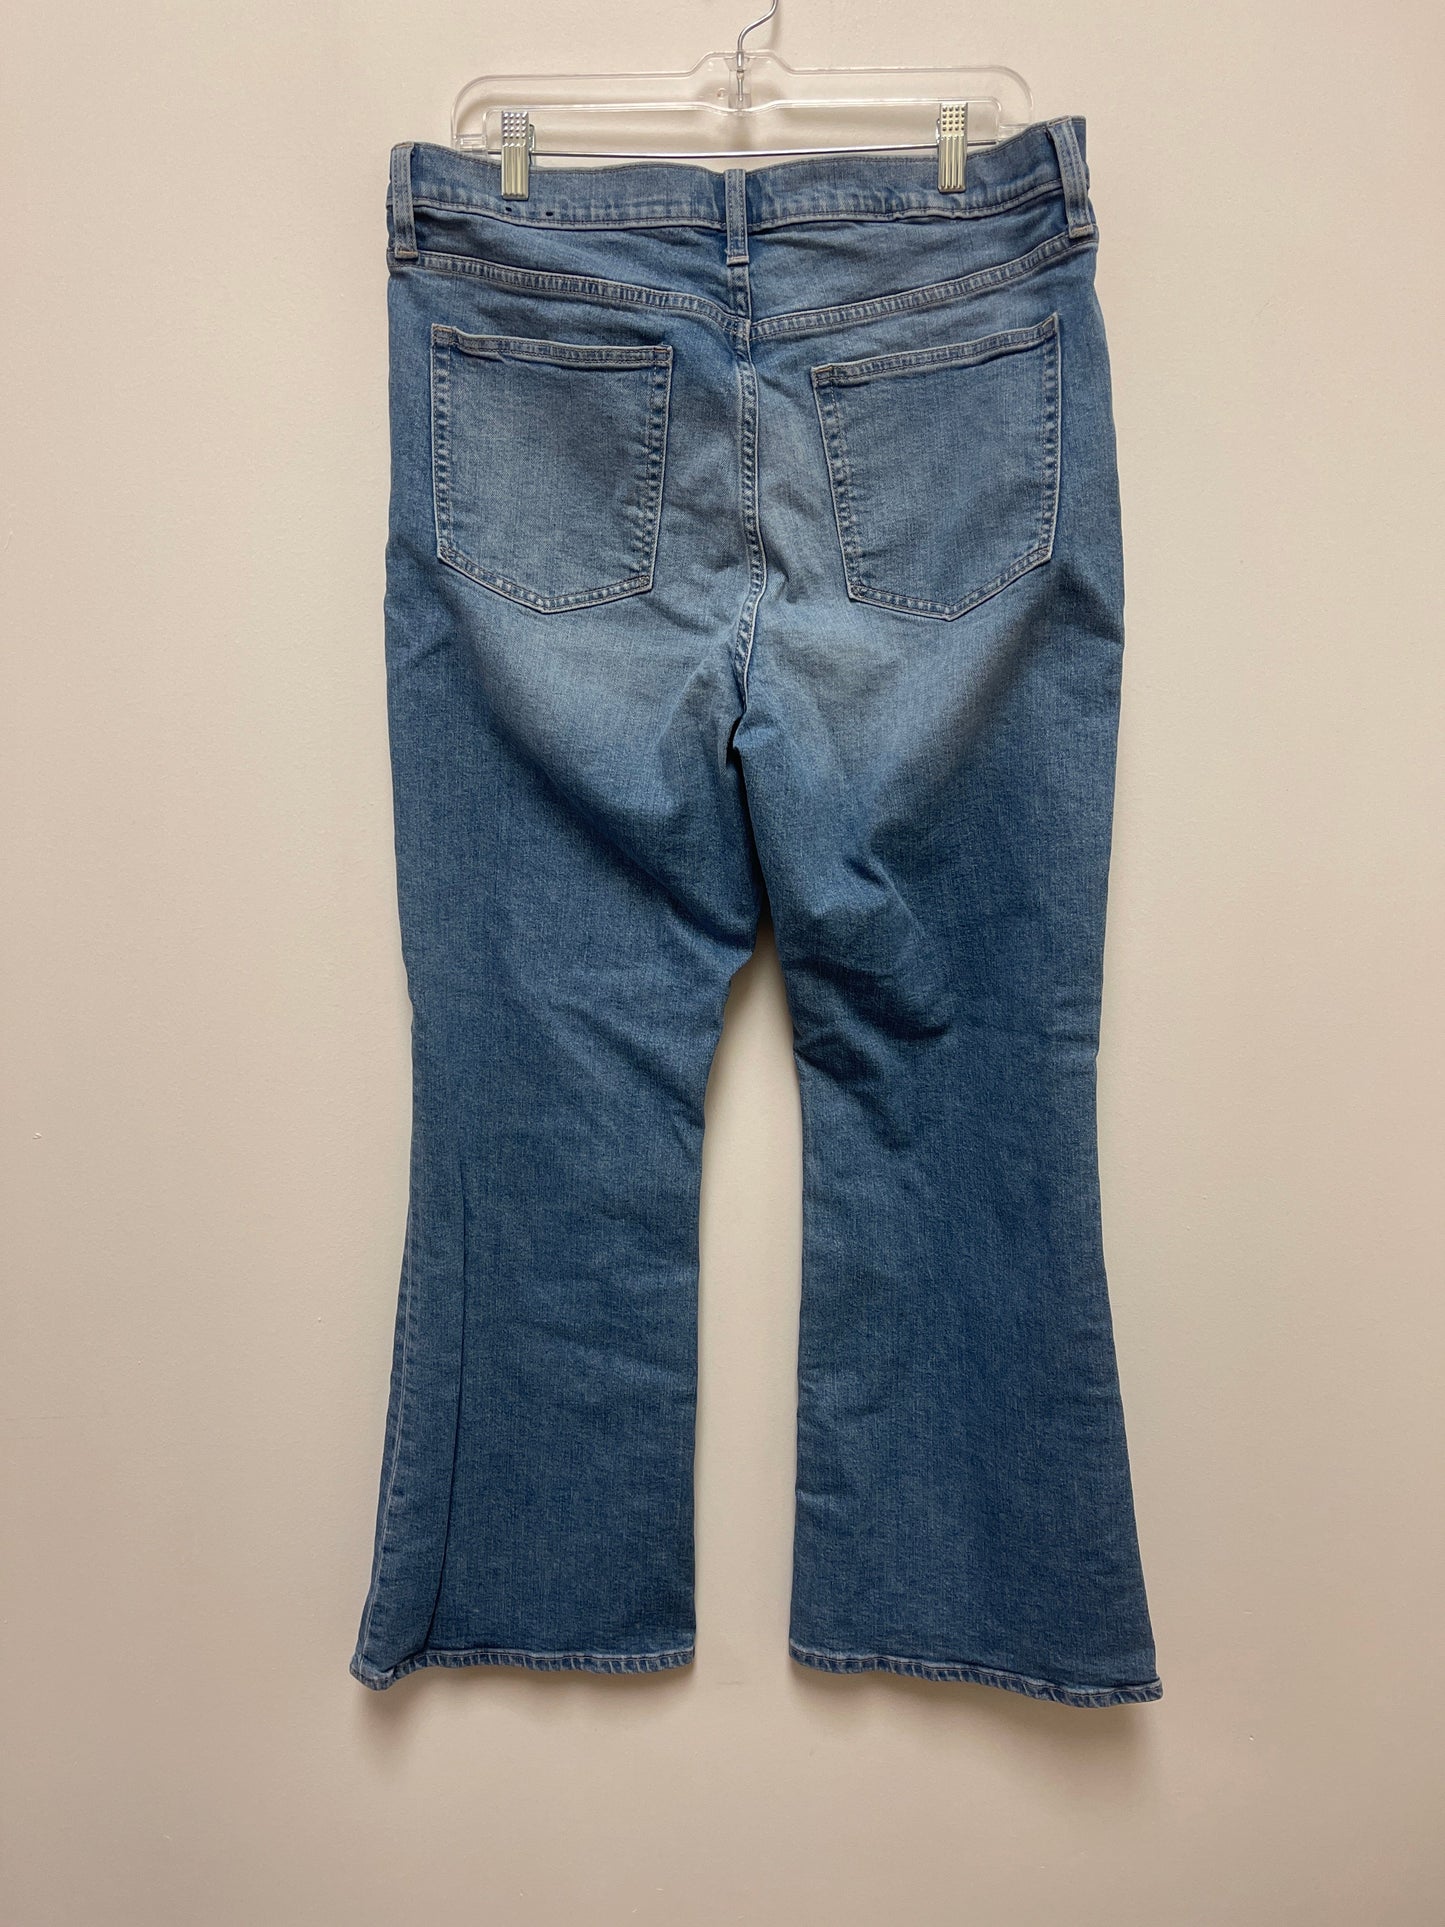 Jeans Flared By Gap  Size: 16